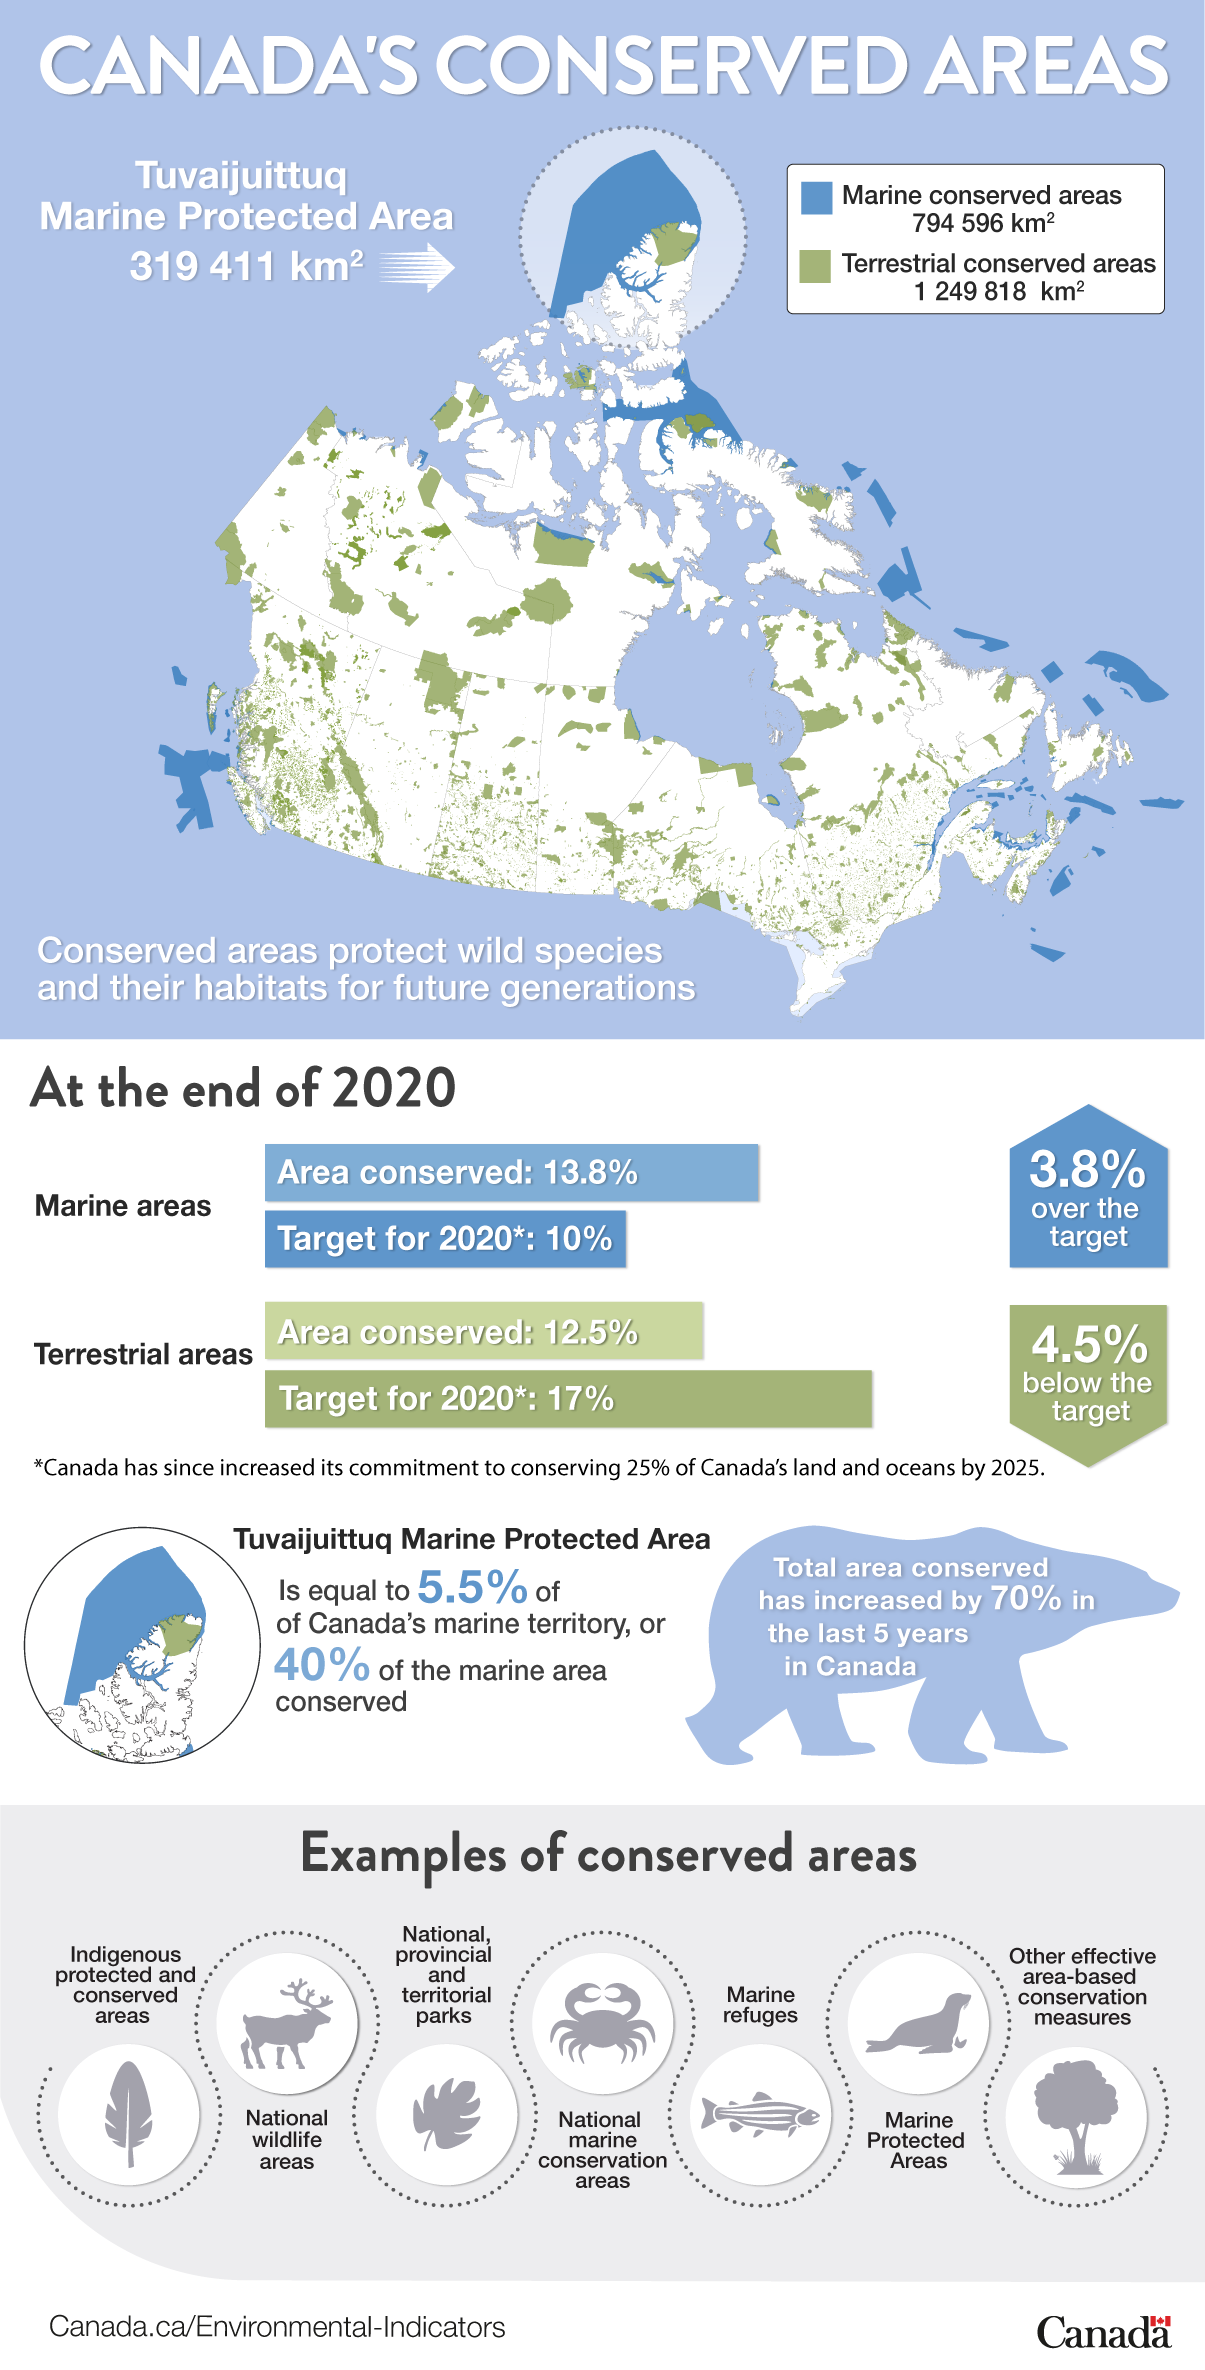 This infographic provides a brief overview of Canada's conserved areas and the progress towards conserving 25% of Canada's land and oceans by 2025.